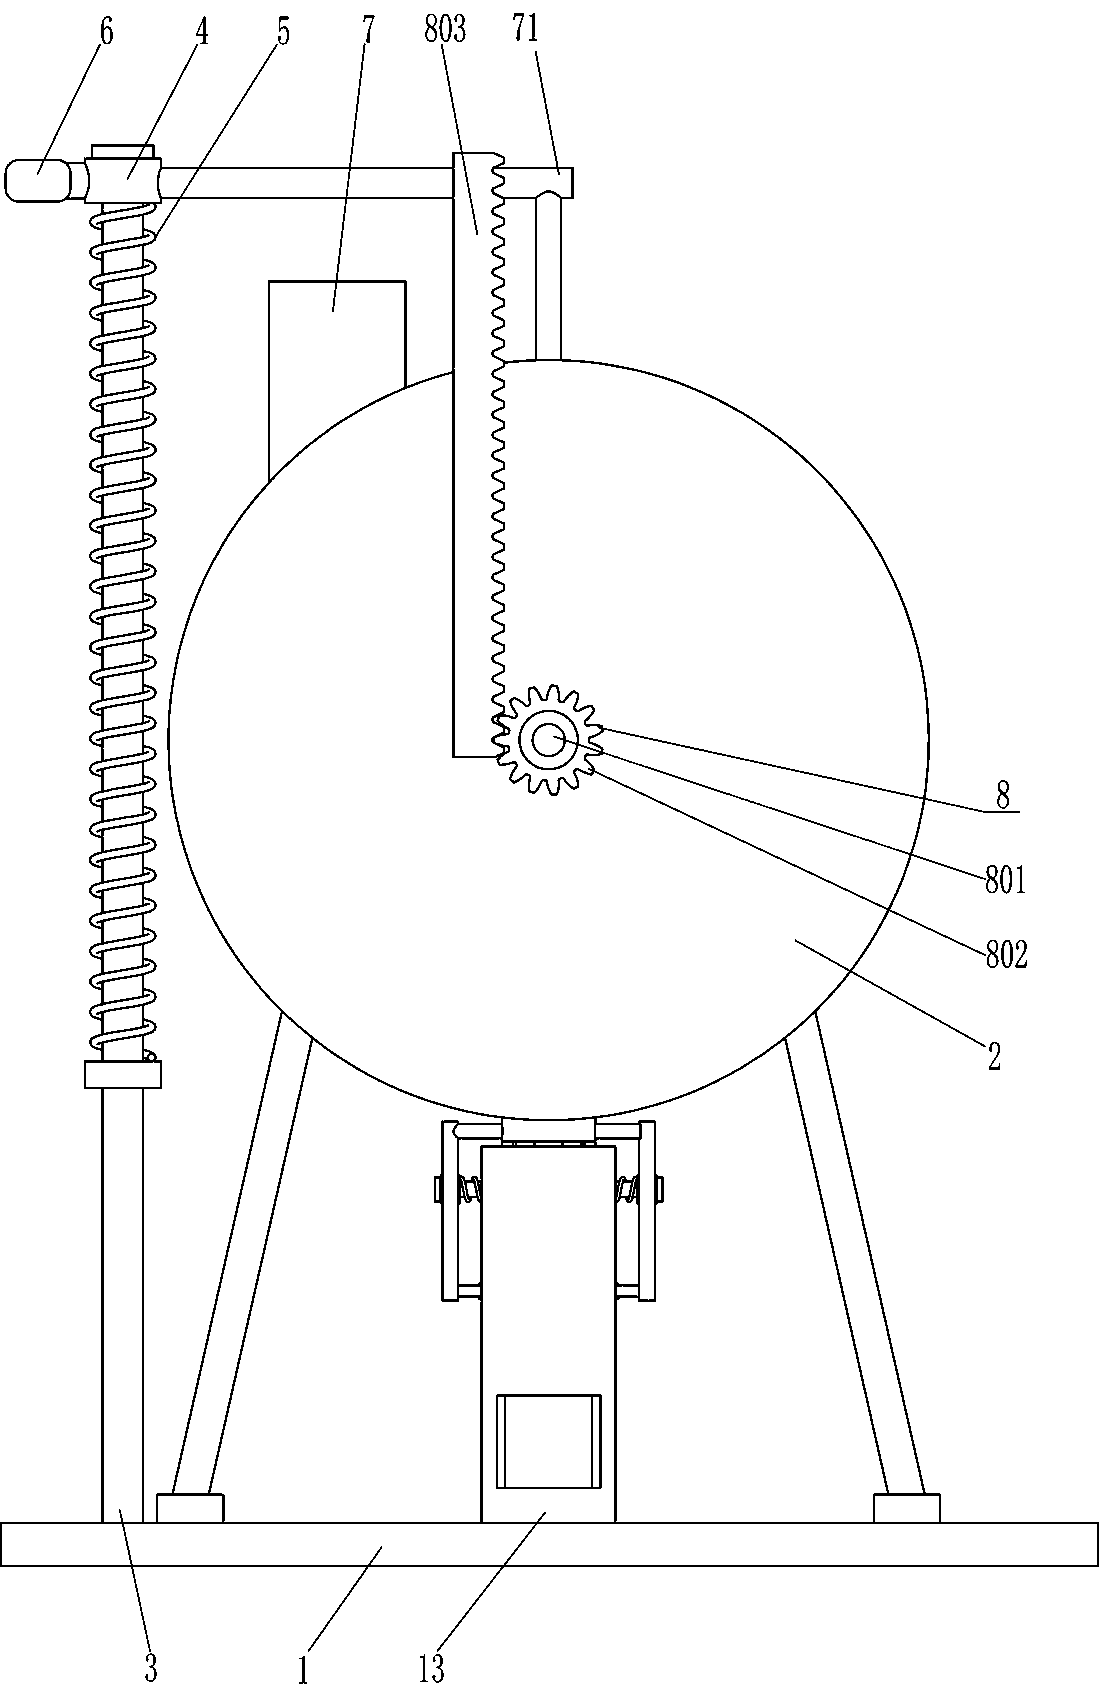 Double-color ball extracting device for random extraction and selection